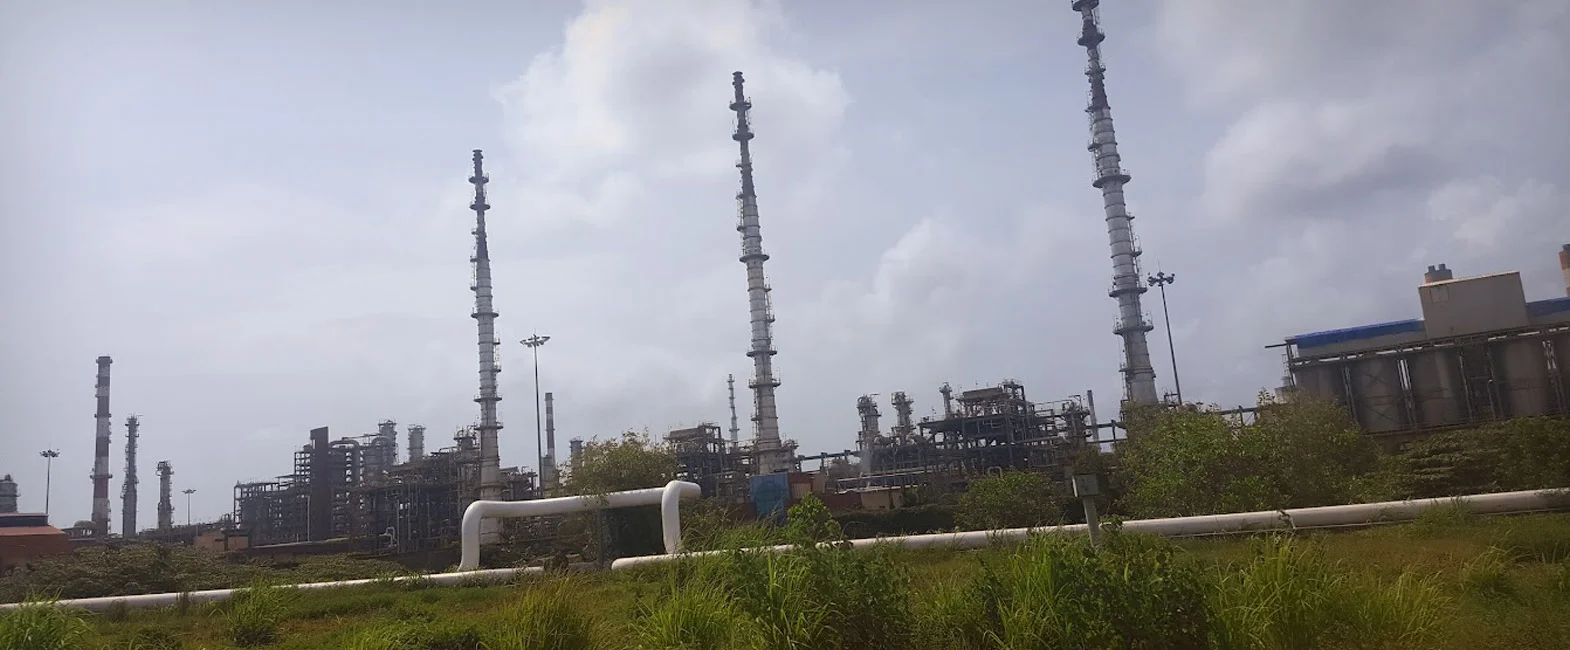 Mukand Ltd | Mechanical & Piping Works for MRPL-BOP of DCU (Phase III) Refinery Project in Mangalore.